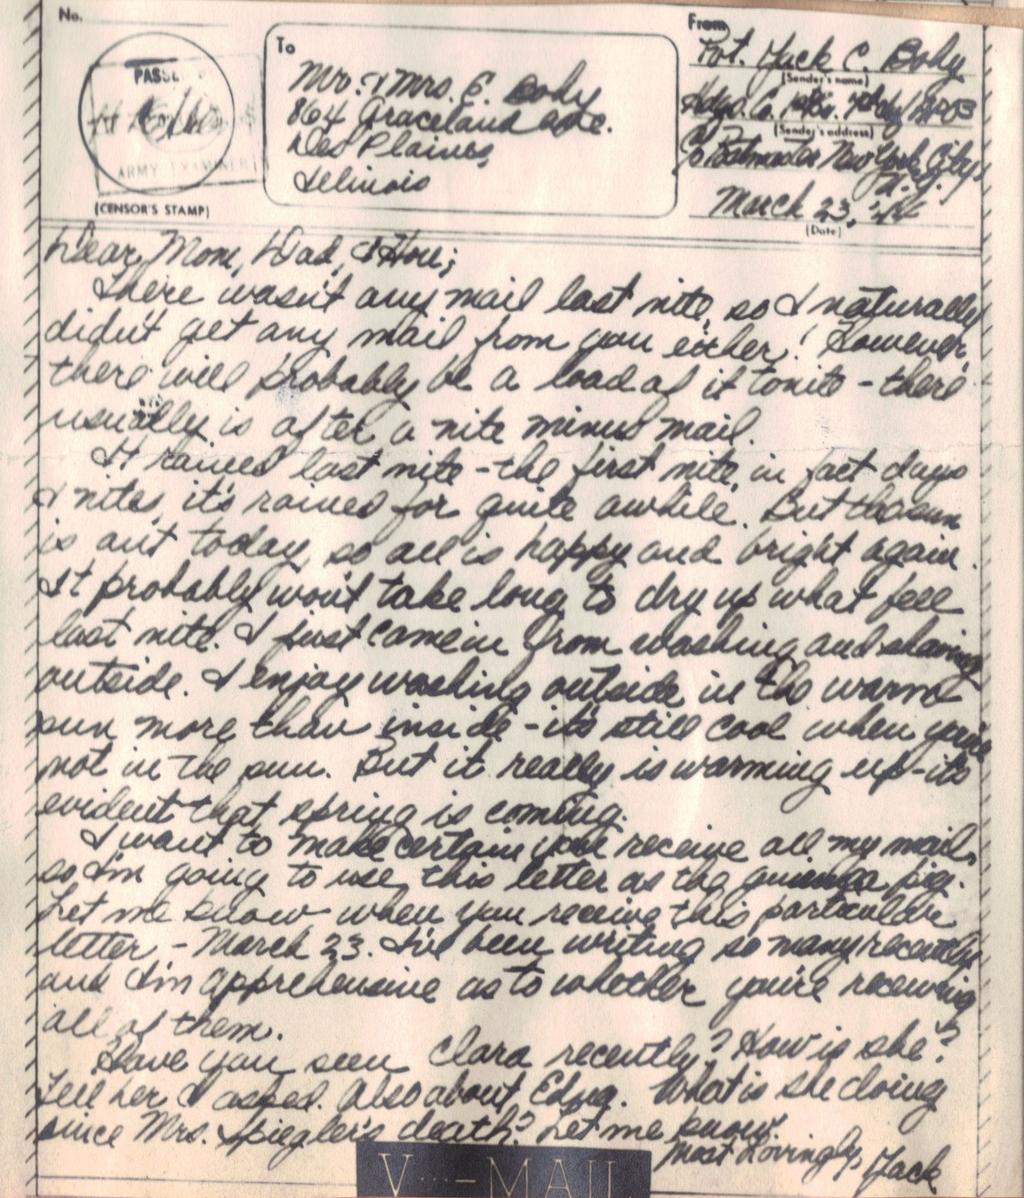 Mar 23, 1944 Dear Mom, Dad & Hou; There wasn't any mail last night, so I naturally didn't get any mail from you either!